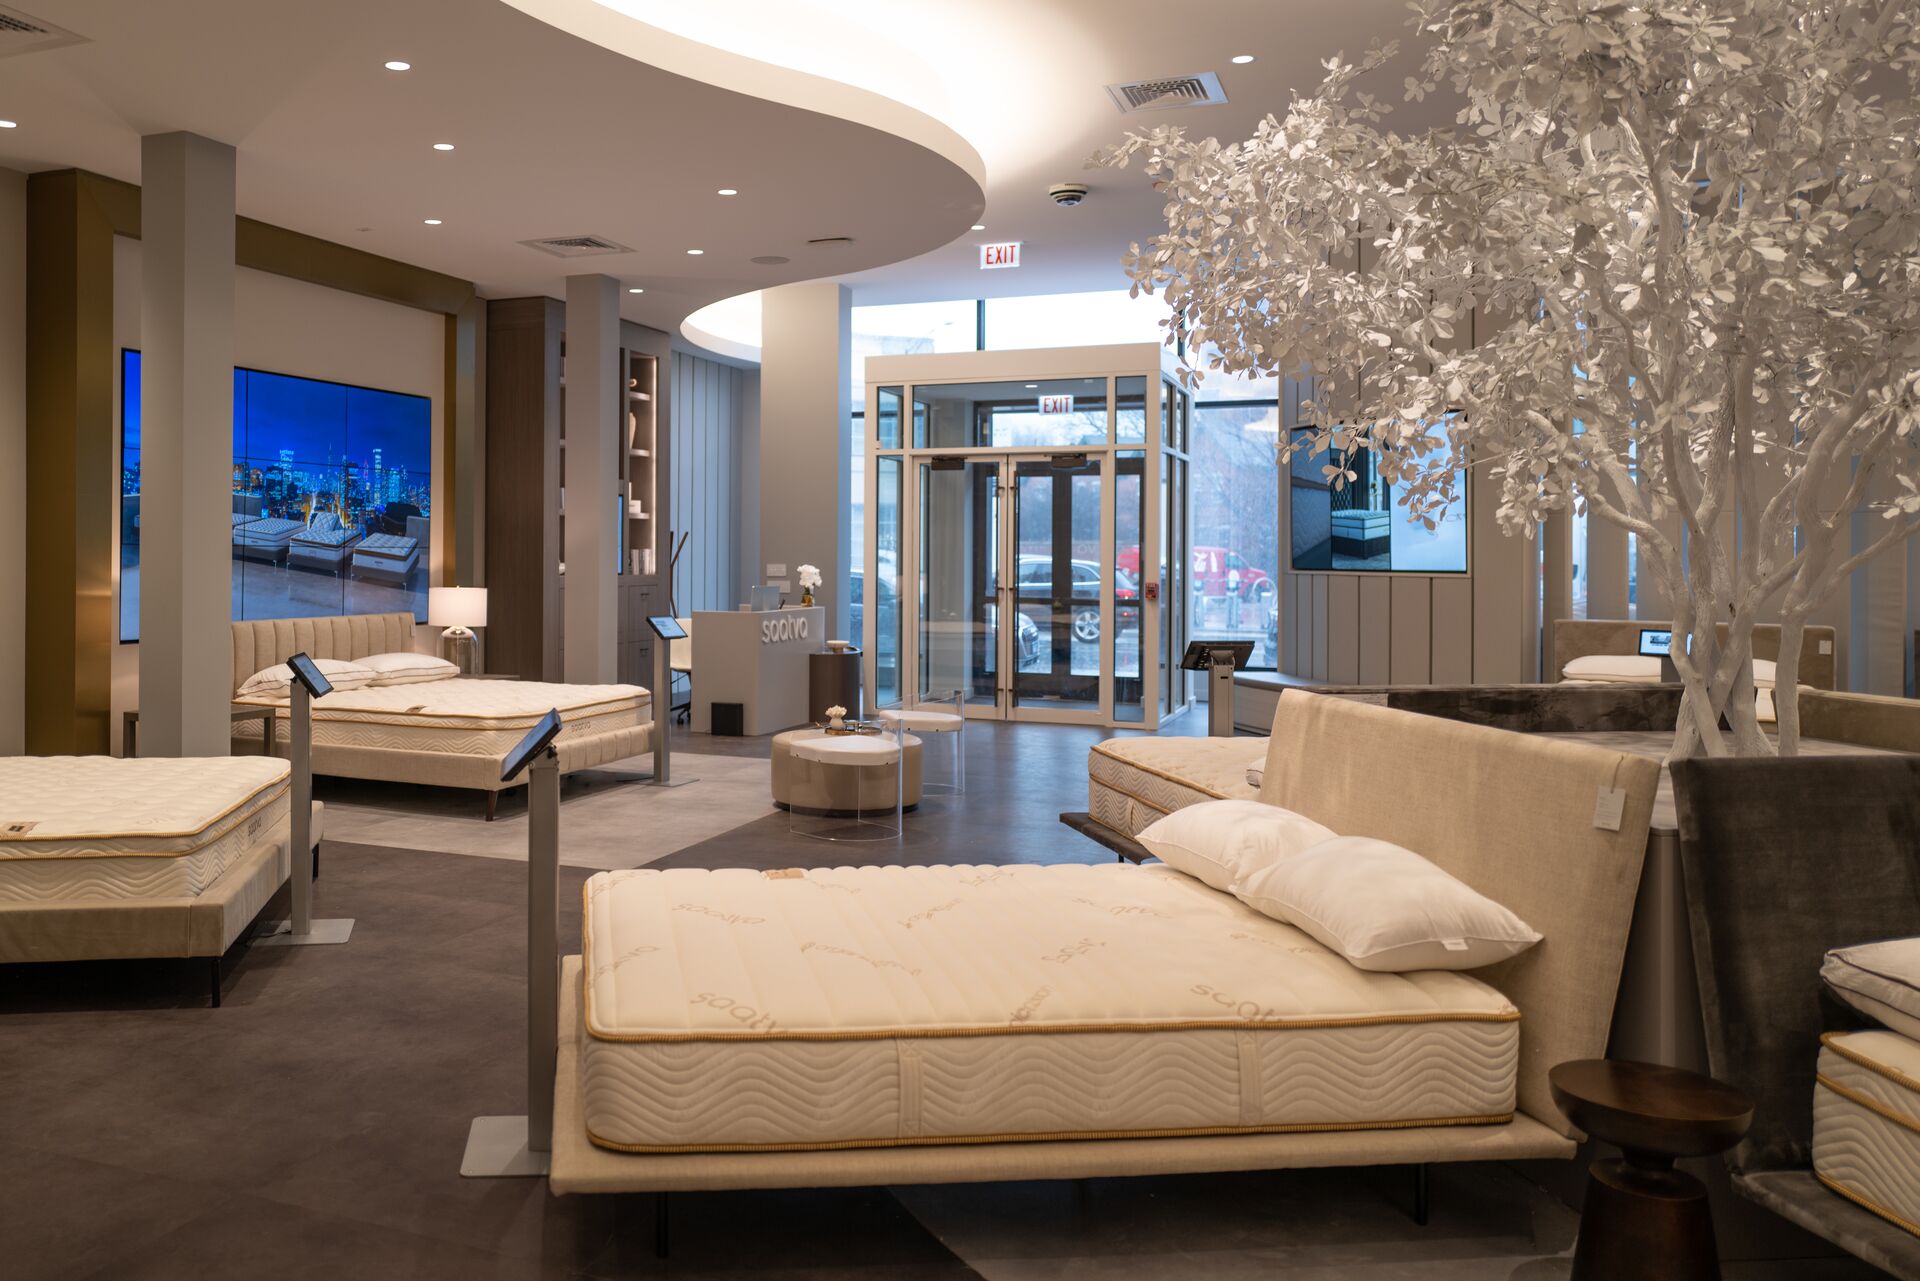 The Saatva Chicago Viewing Room, the Smarter Luxury Sleep Company's flagship location in the Midwest